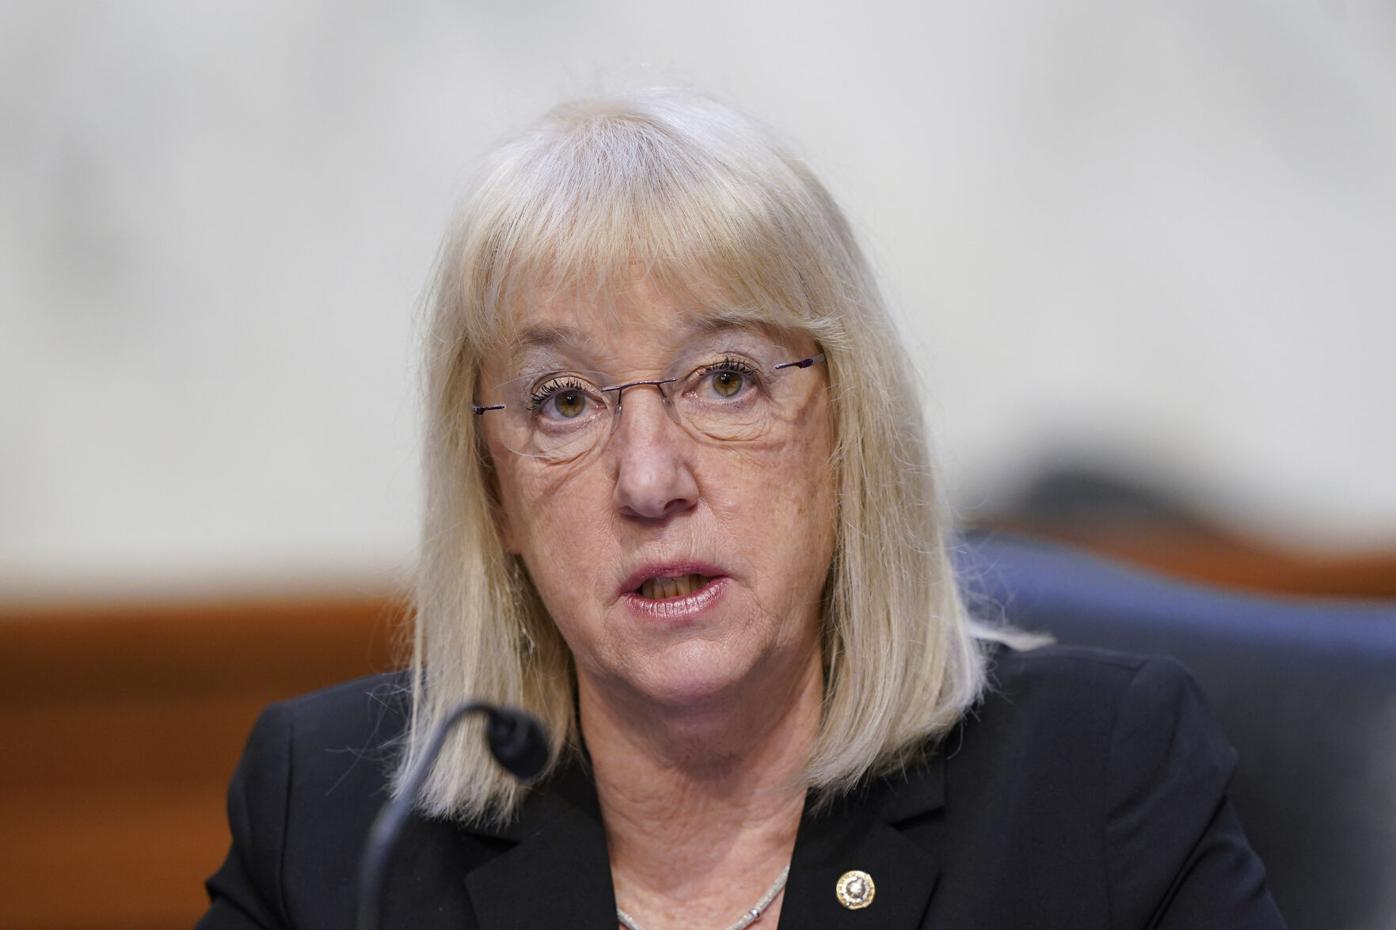 Patty Murray in 19 Takes - The American Prospect